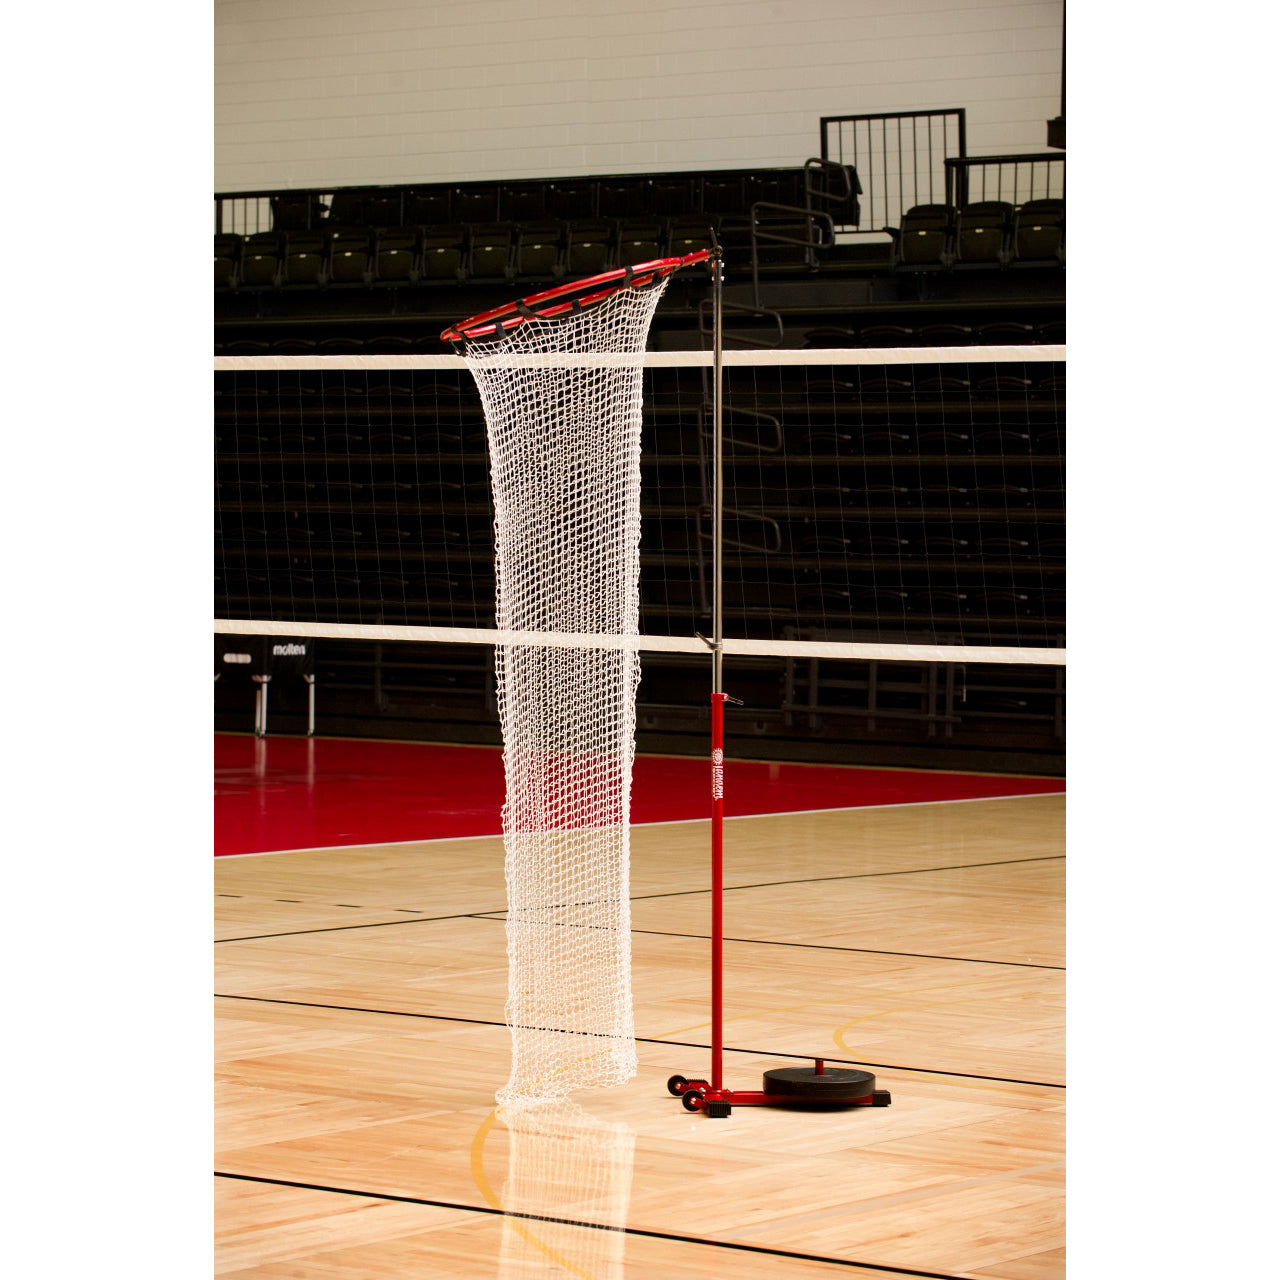 Trainer+ Volleyball Setter Training Target | Sports Imports